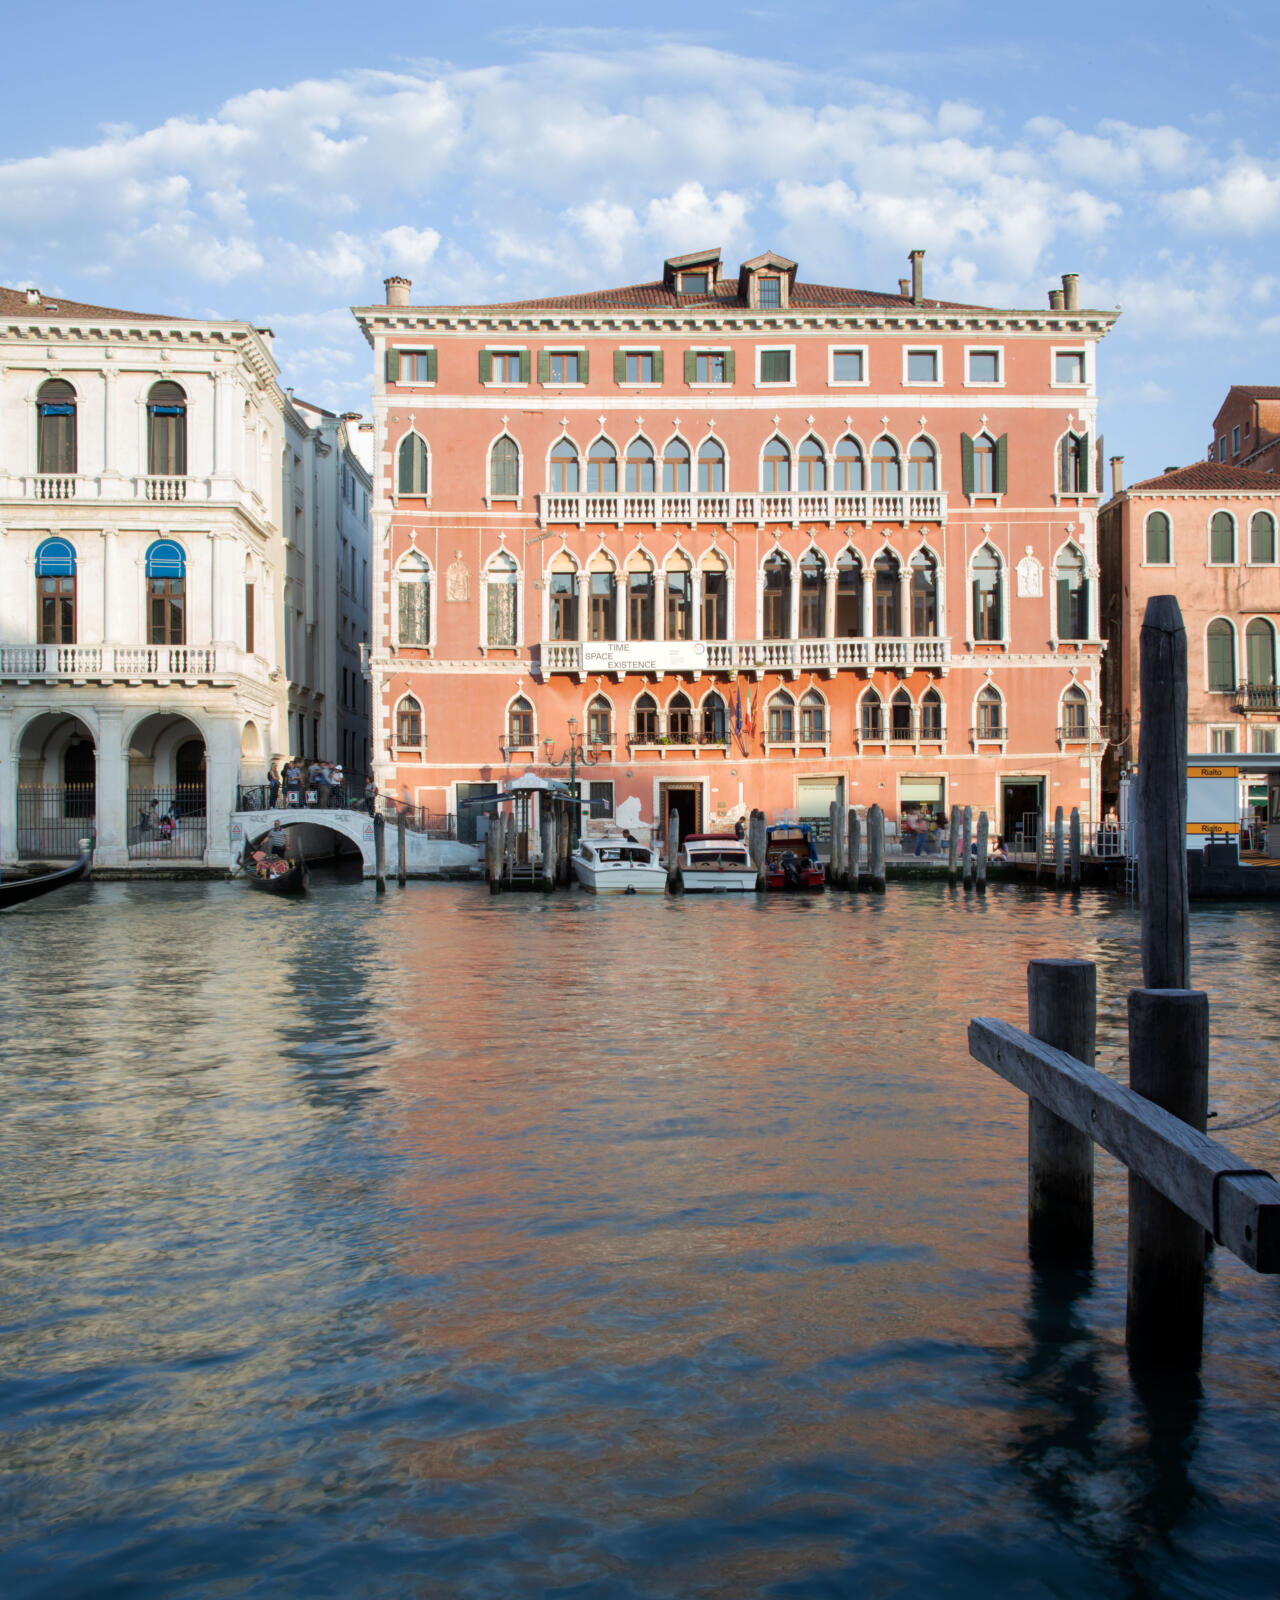 A building in Venice, Italy showcased at the Venice Architecture Biennale 2023.